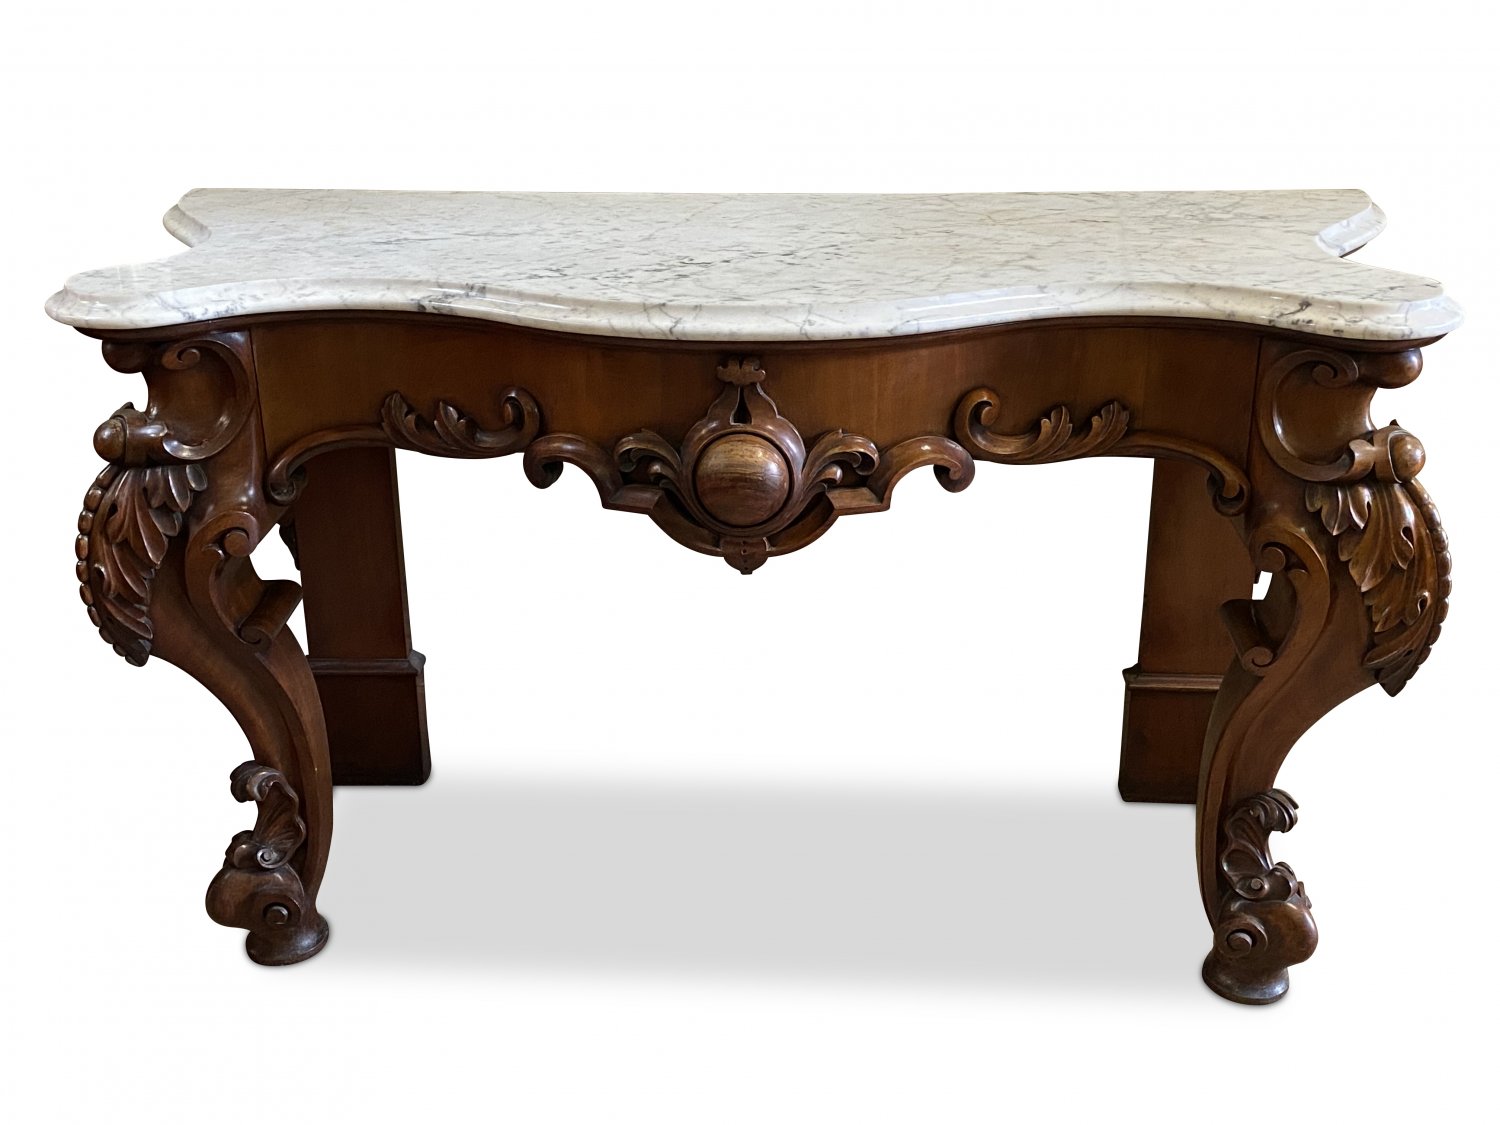 19th-century English mahogany serpentine console table with white Carrara marble top